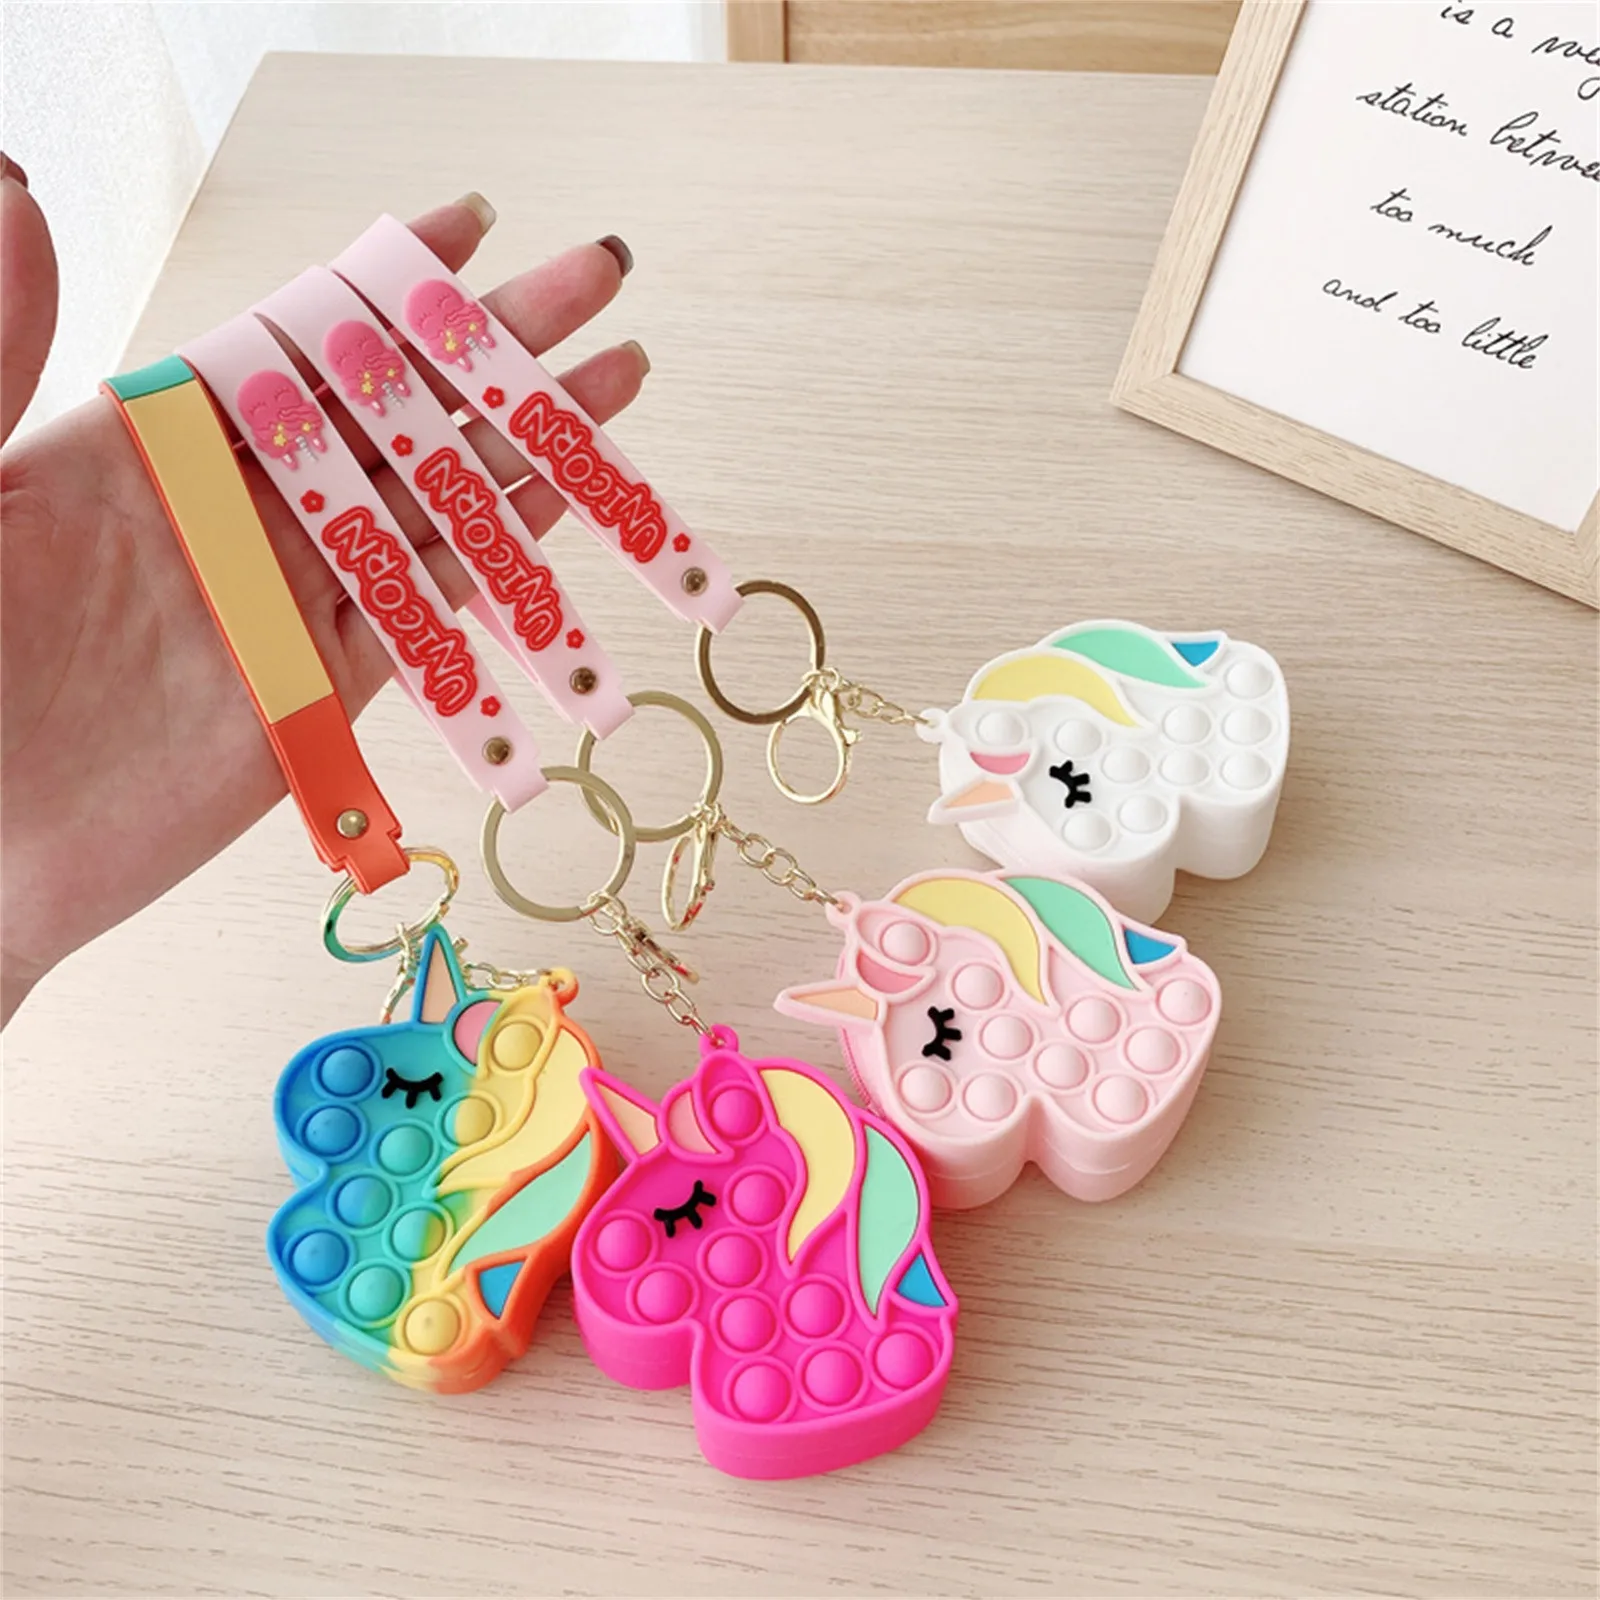 dna stress ball 2021 Pops its Fidget Toy Antistress Rainbow Pops Push Bubble Simple Dimple Keychain Fidget Stress Relief Its Toys For Kids Adult dna ball fidget